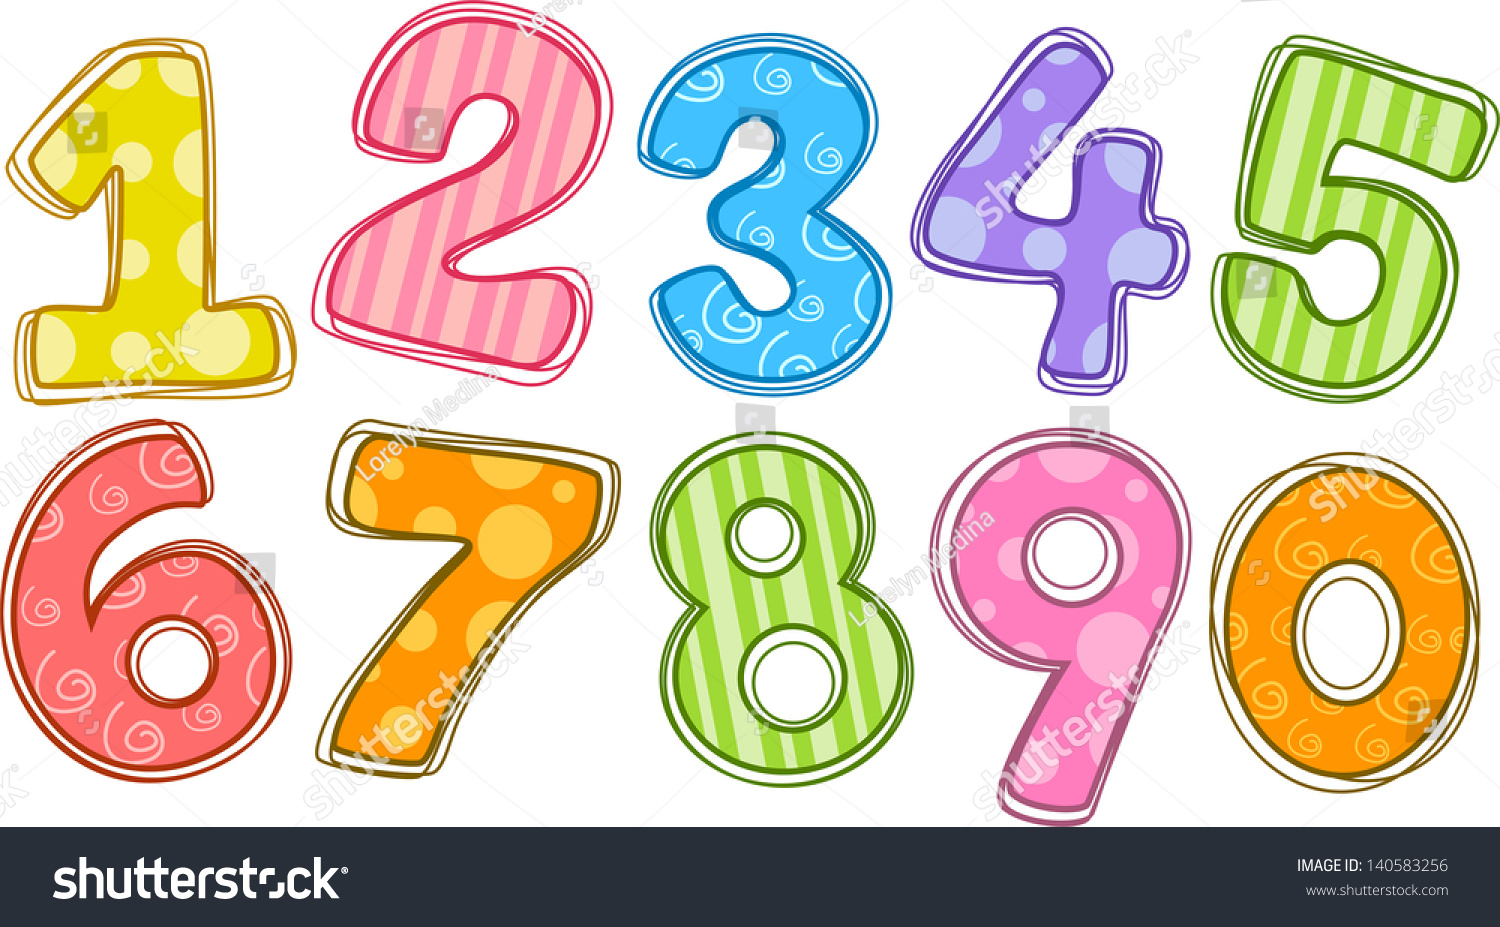 Printable Number 1 Colorful